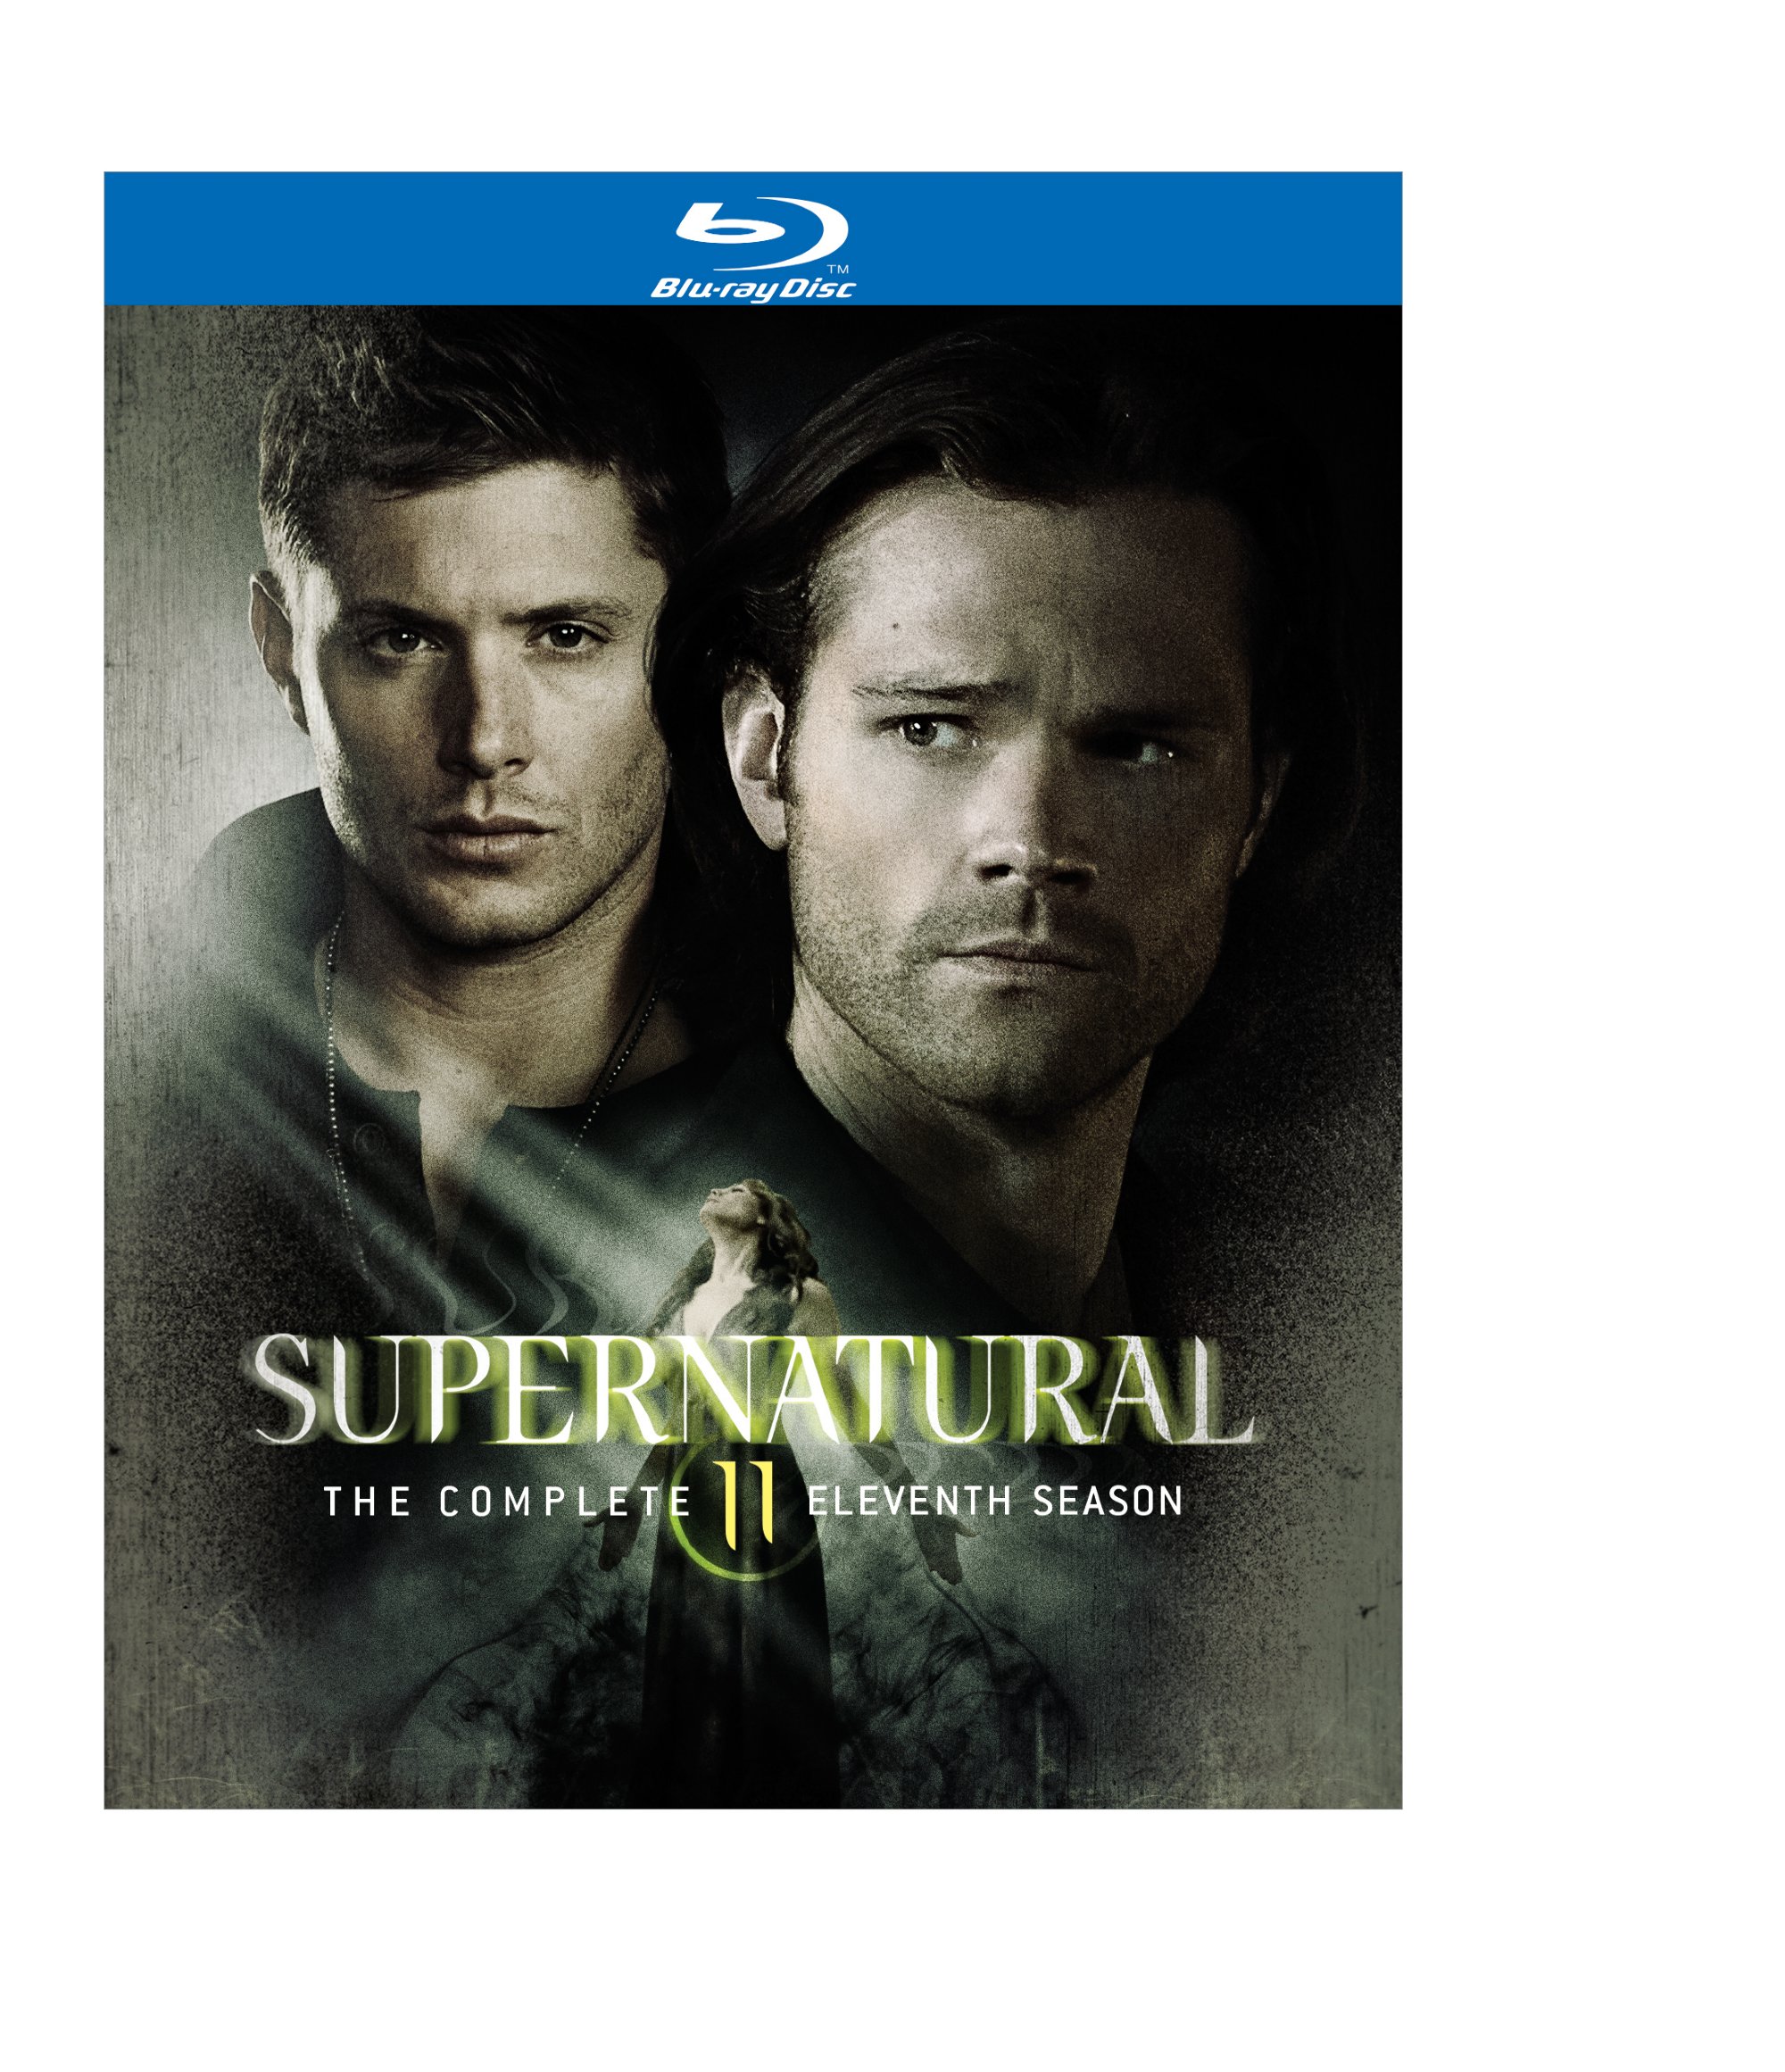 Supernatural: The Complete Eleventh Season - Blu-ray [ 2016 ]  - Sci Fi Television On Blu-ray - TV Shows On GRUV